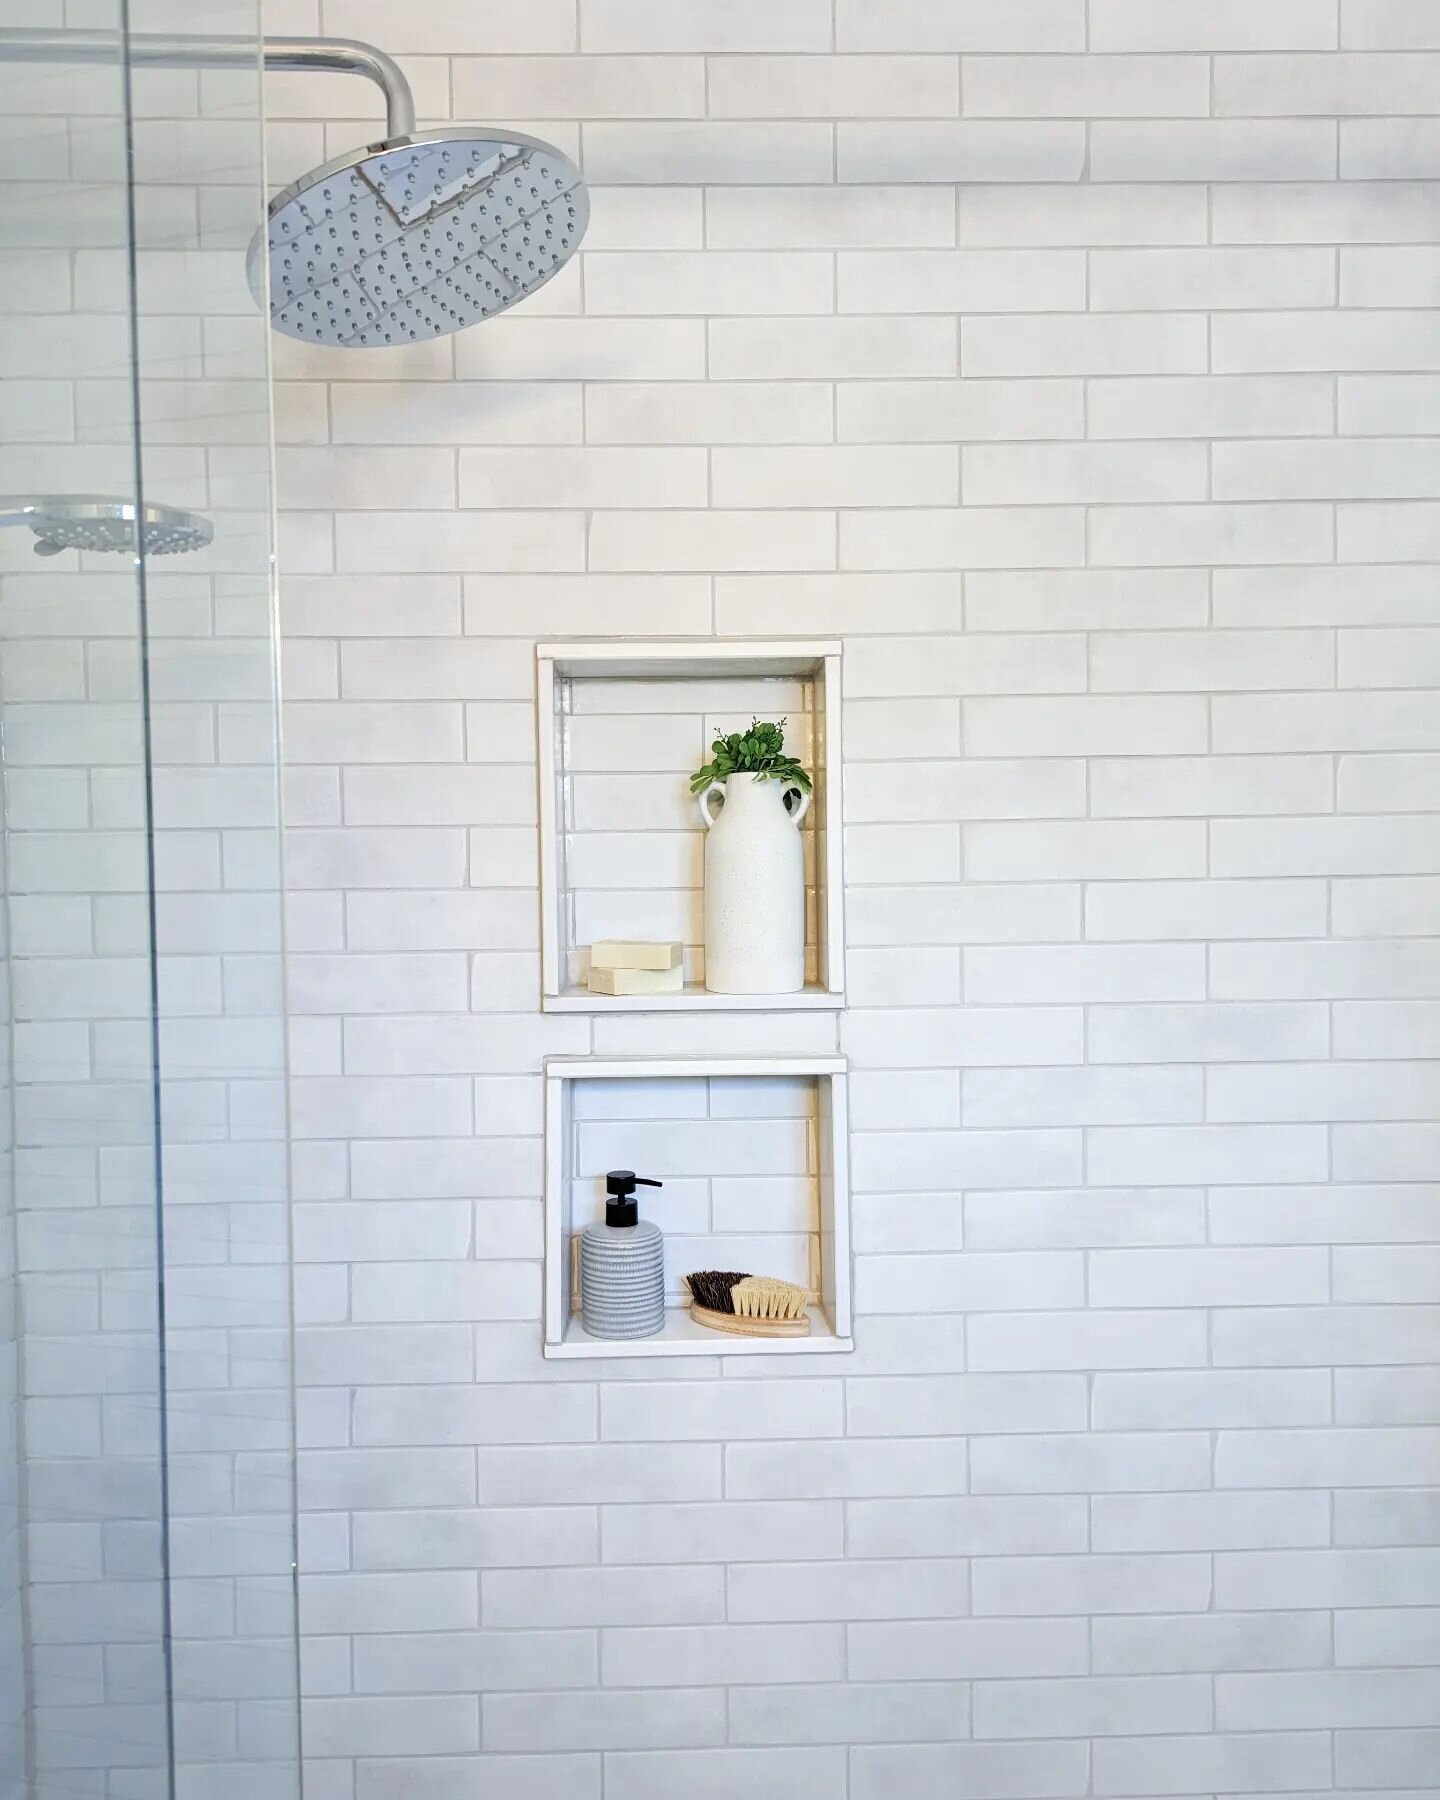 I'm not sure about you but on these wet rainy days I just want warm showers, warm blankets and good books or movies! 

Then again, if my shower tile was this dreamy I'd probably just stay in there for ever and have no idea what the weather was doing!